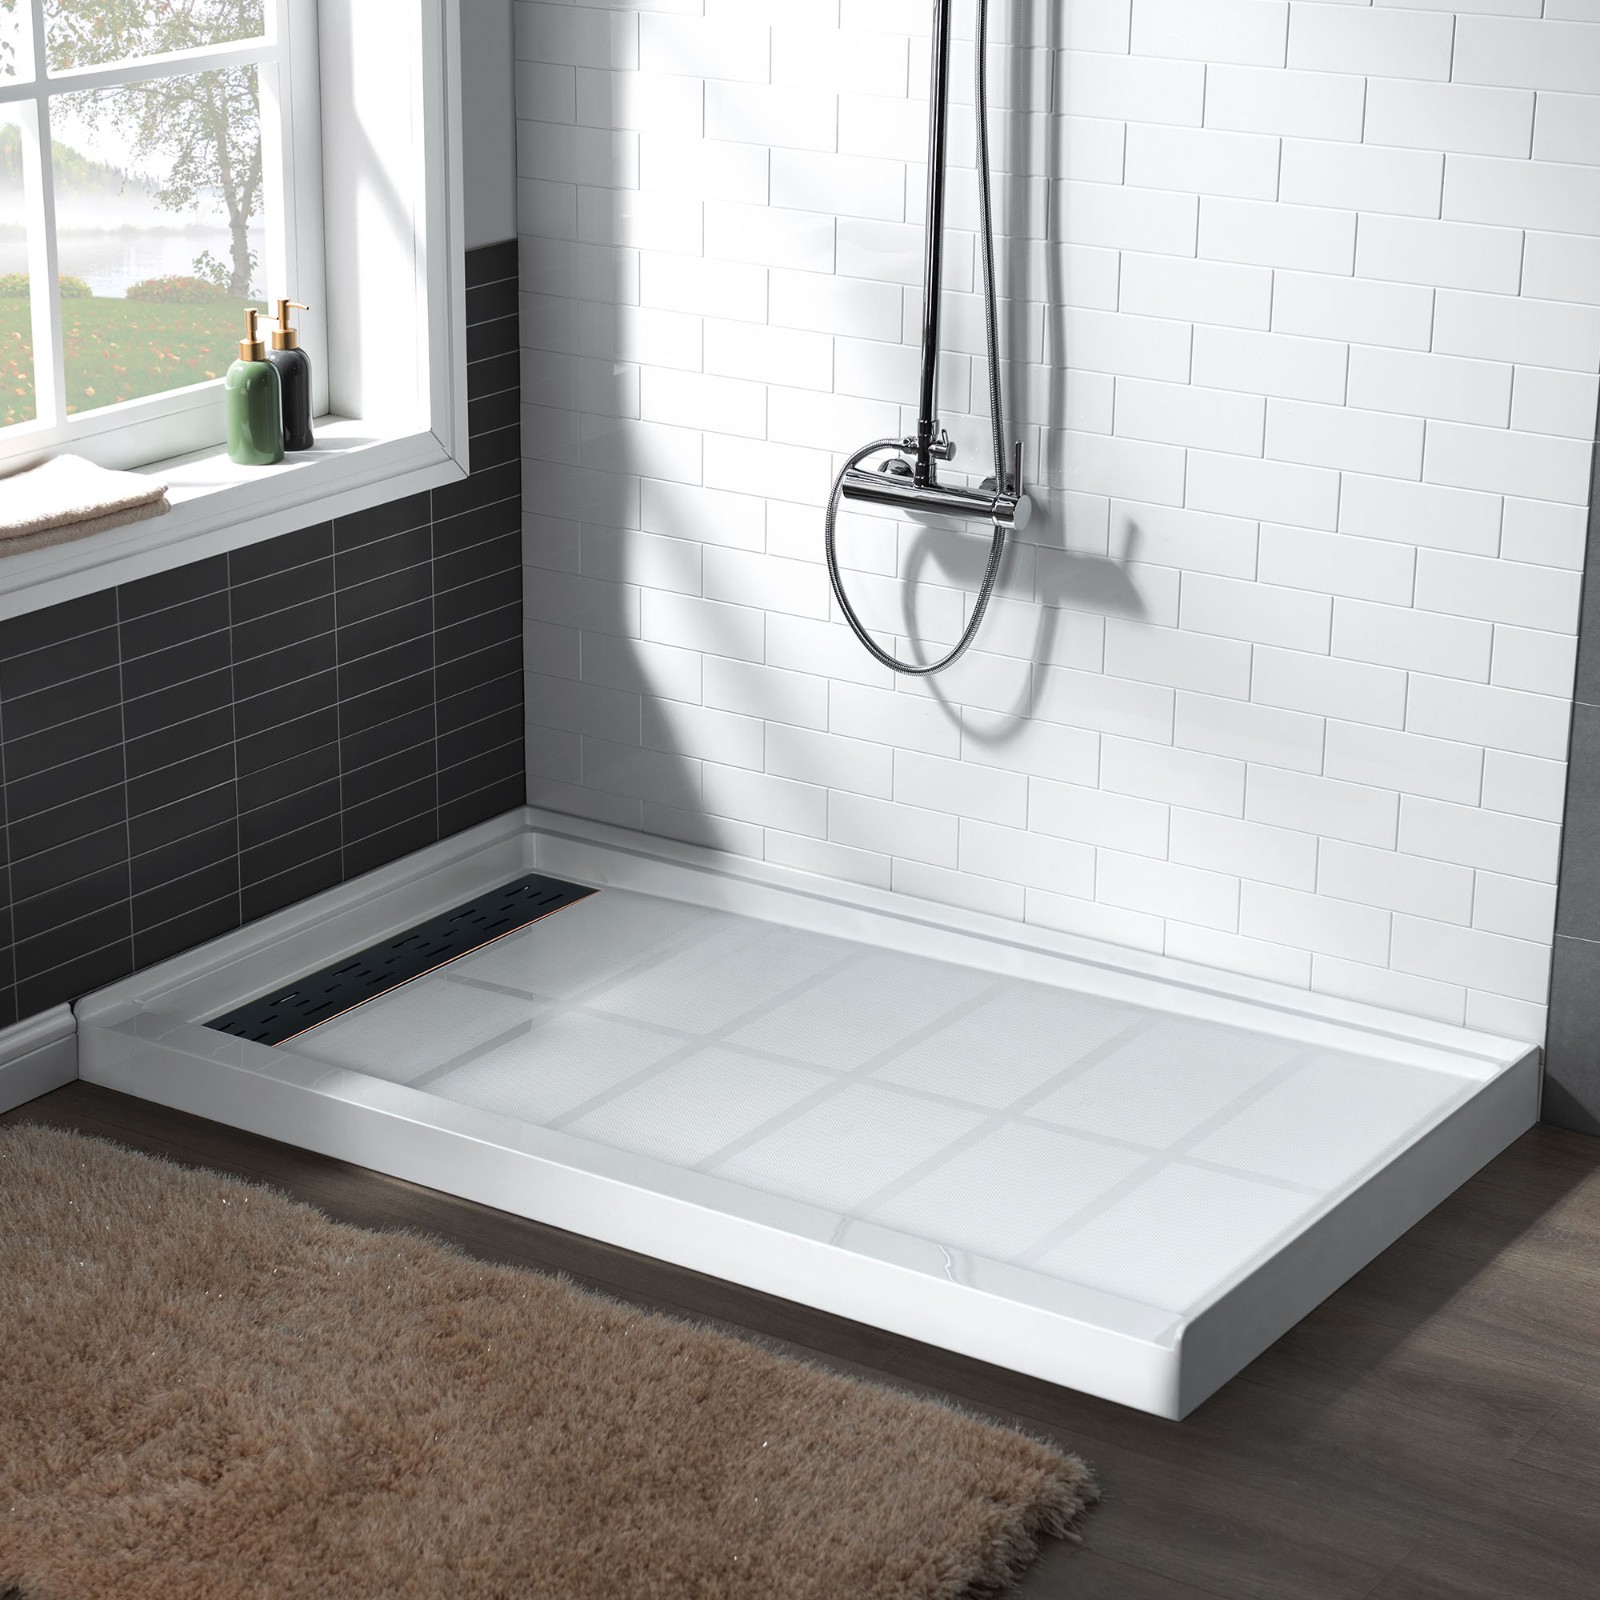  WOODBRIDGE SBR4836-1000L-ORB SolidSurface Shower Base with Recessed Trench Side Including Oil Rubbed Bronze Linear Cover, 48